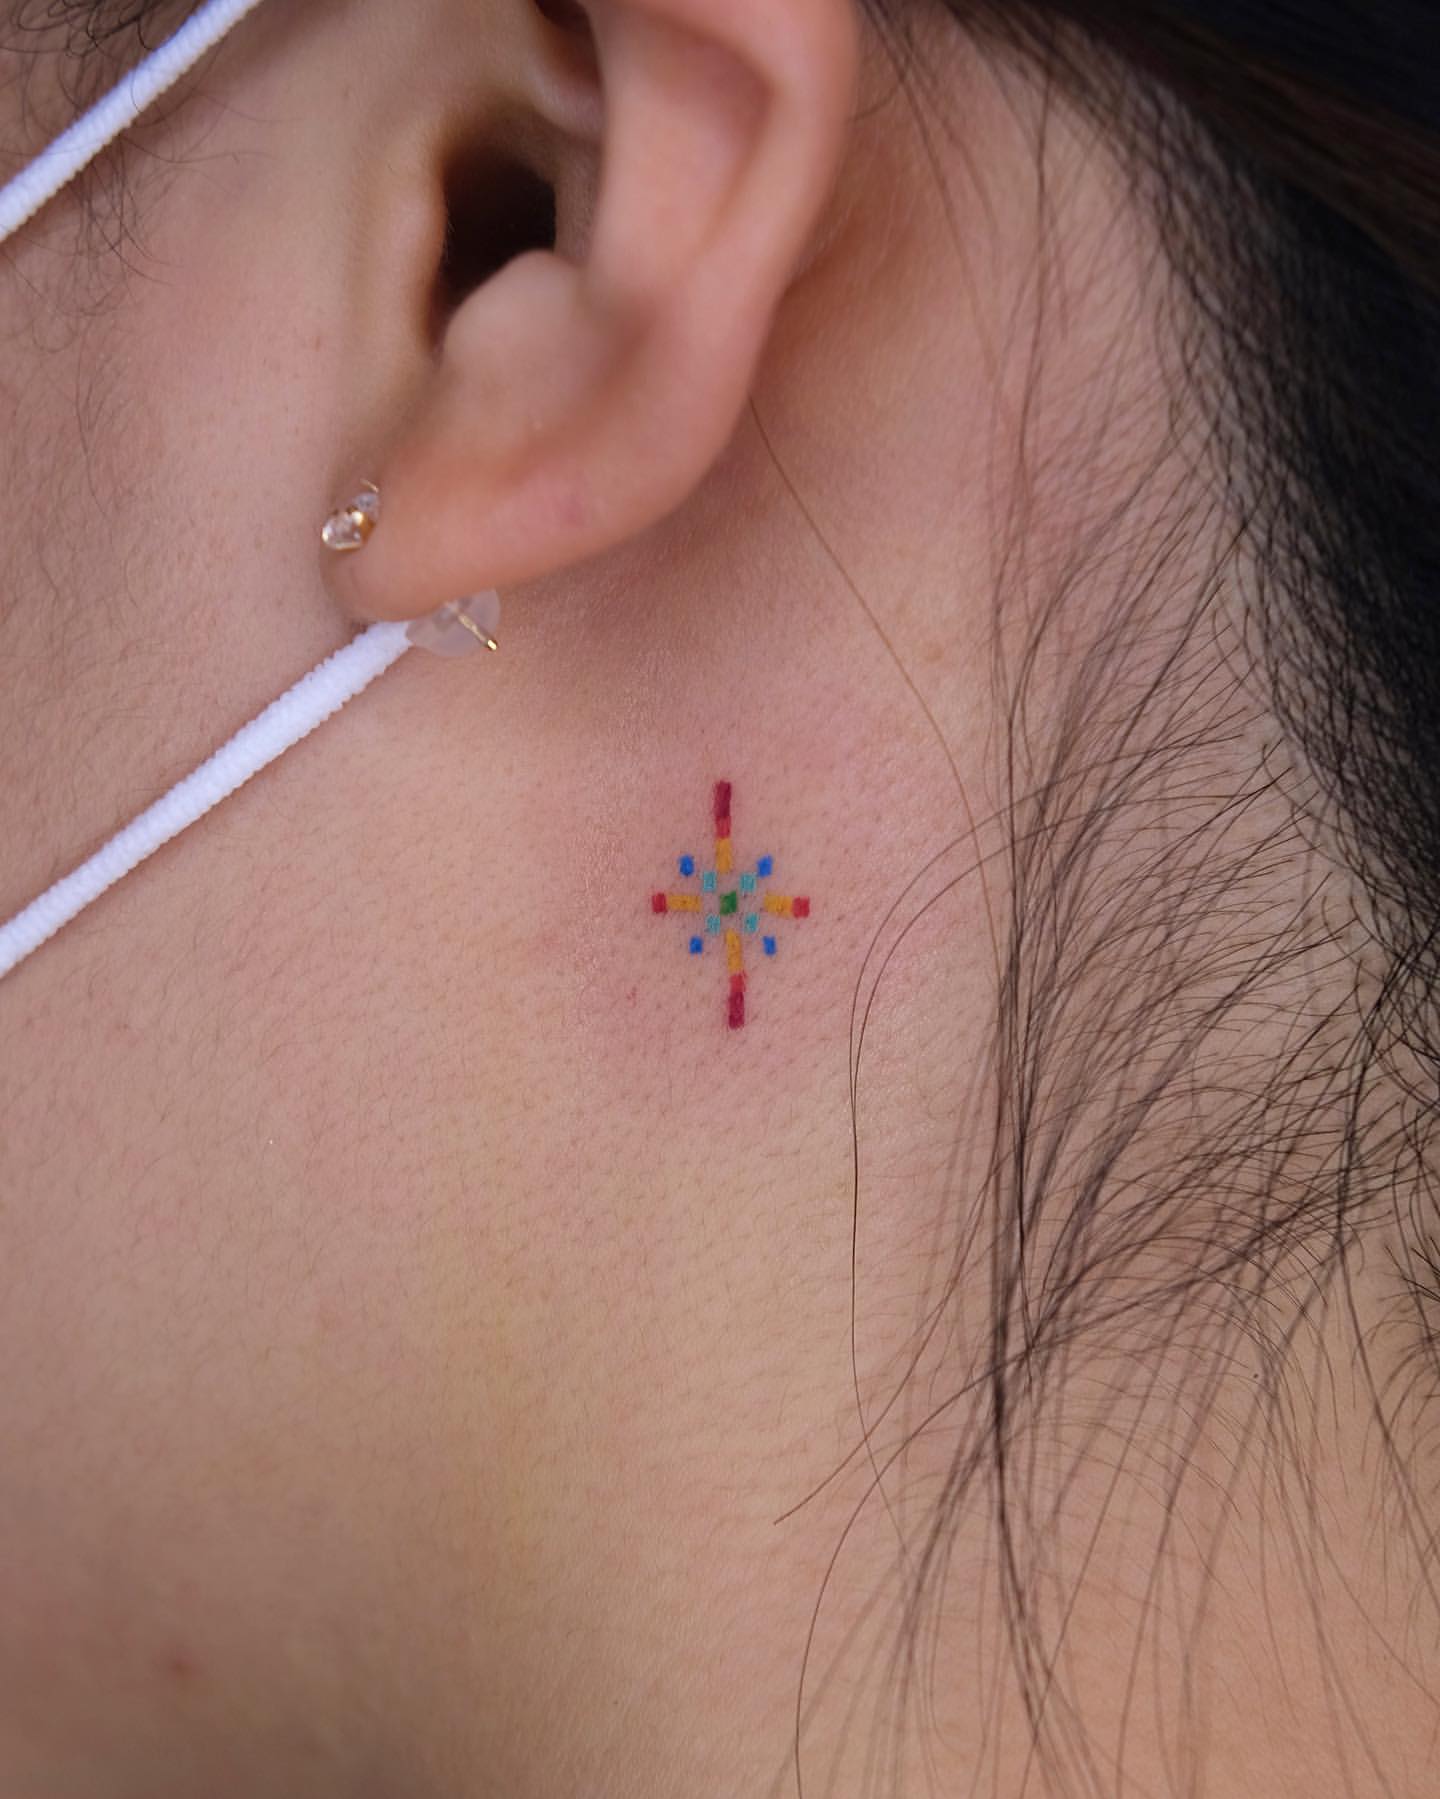 Small Tattoos for Women 2